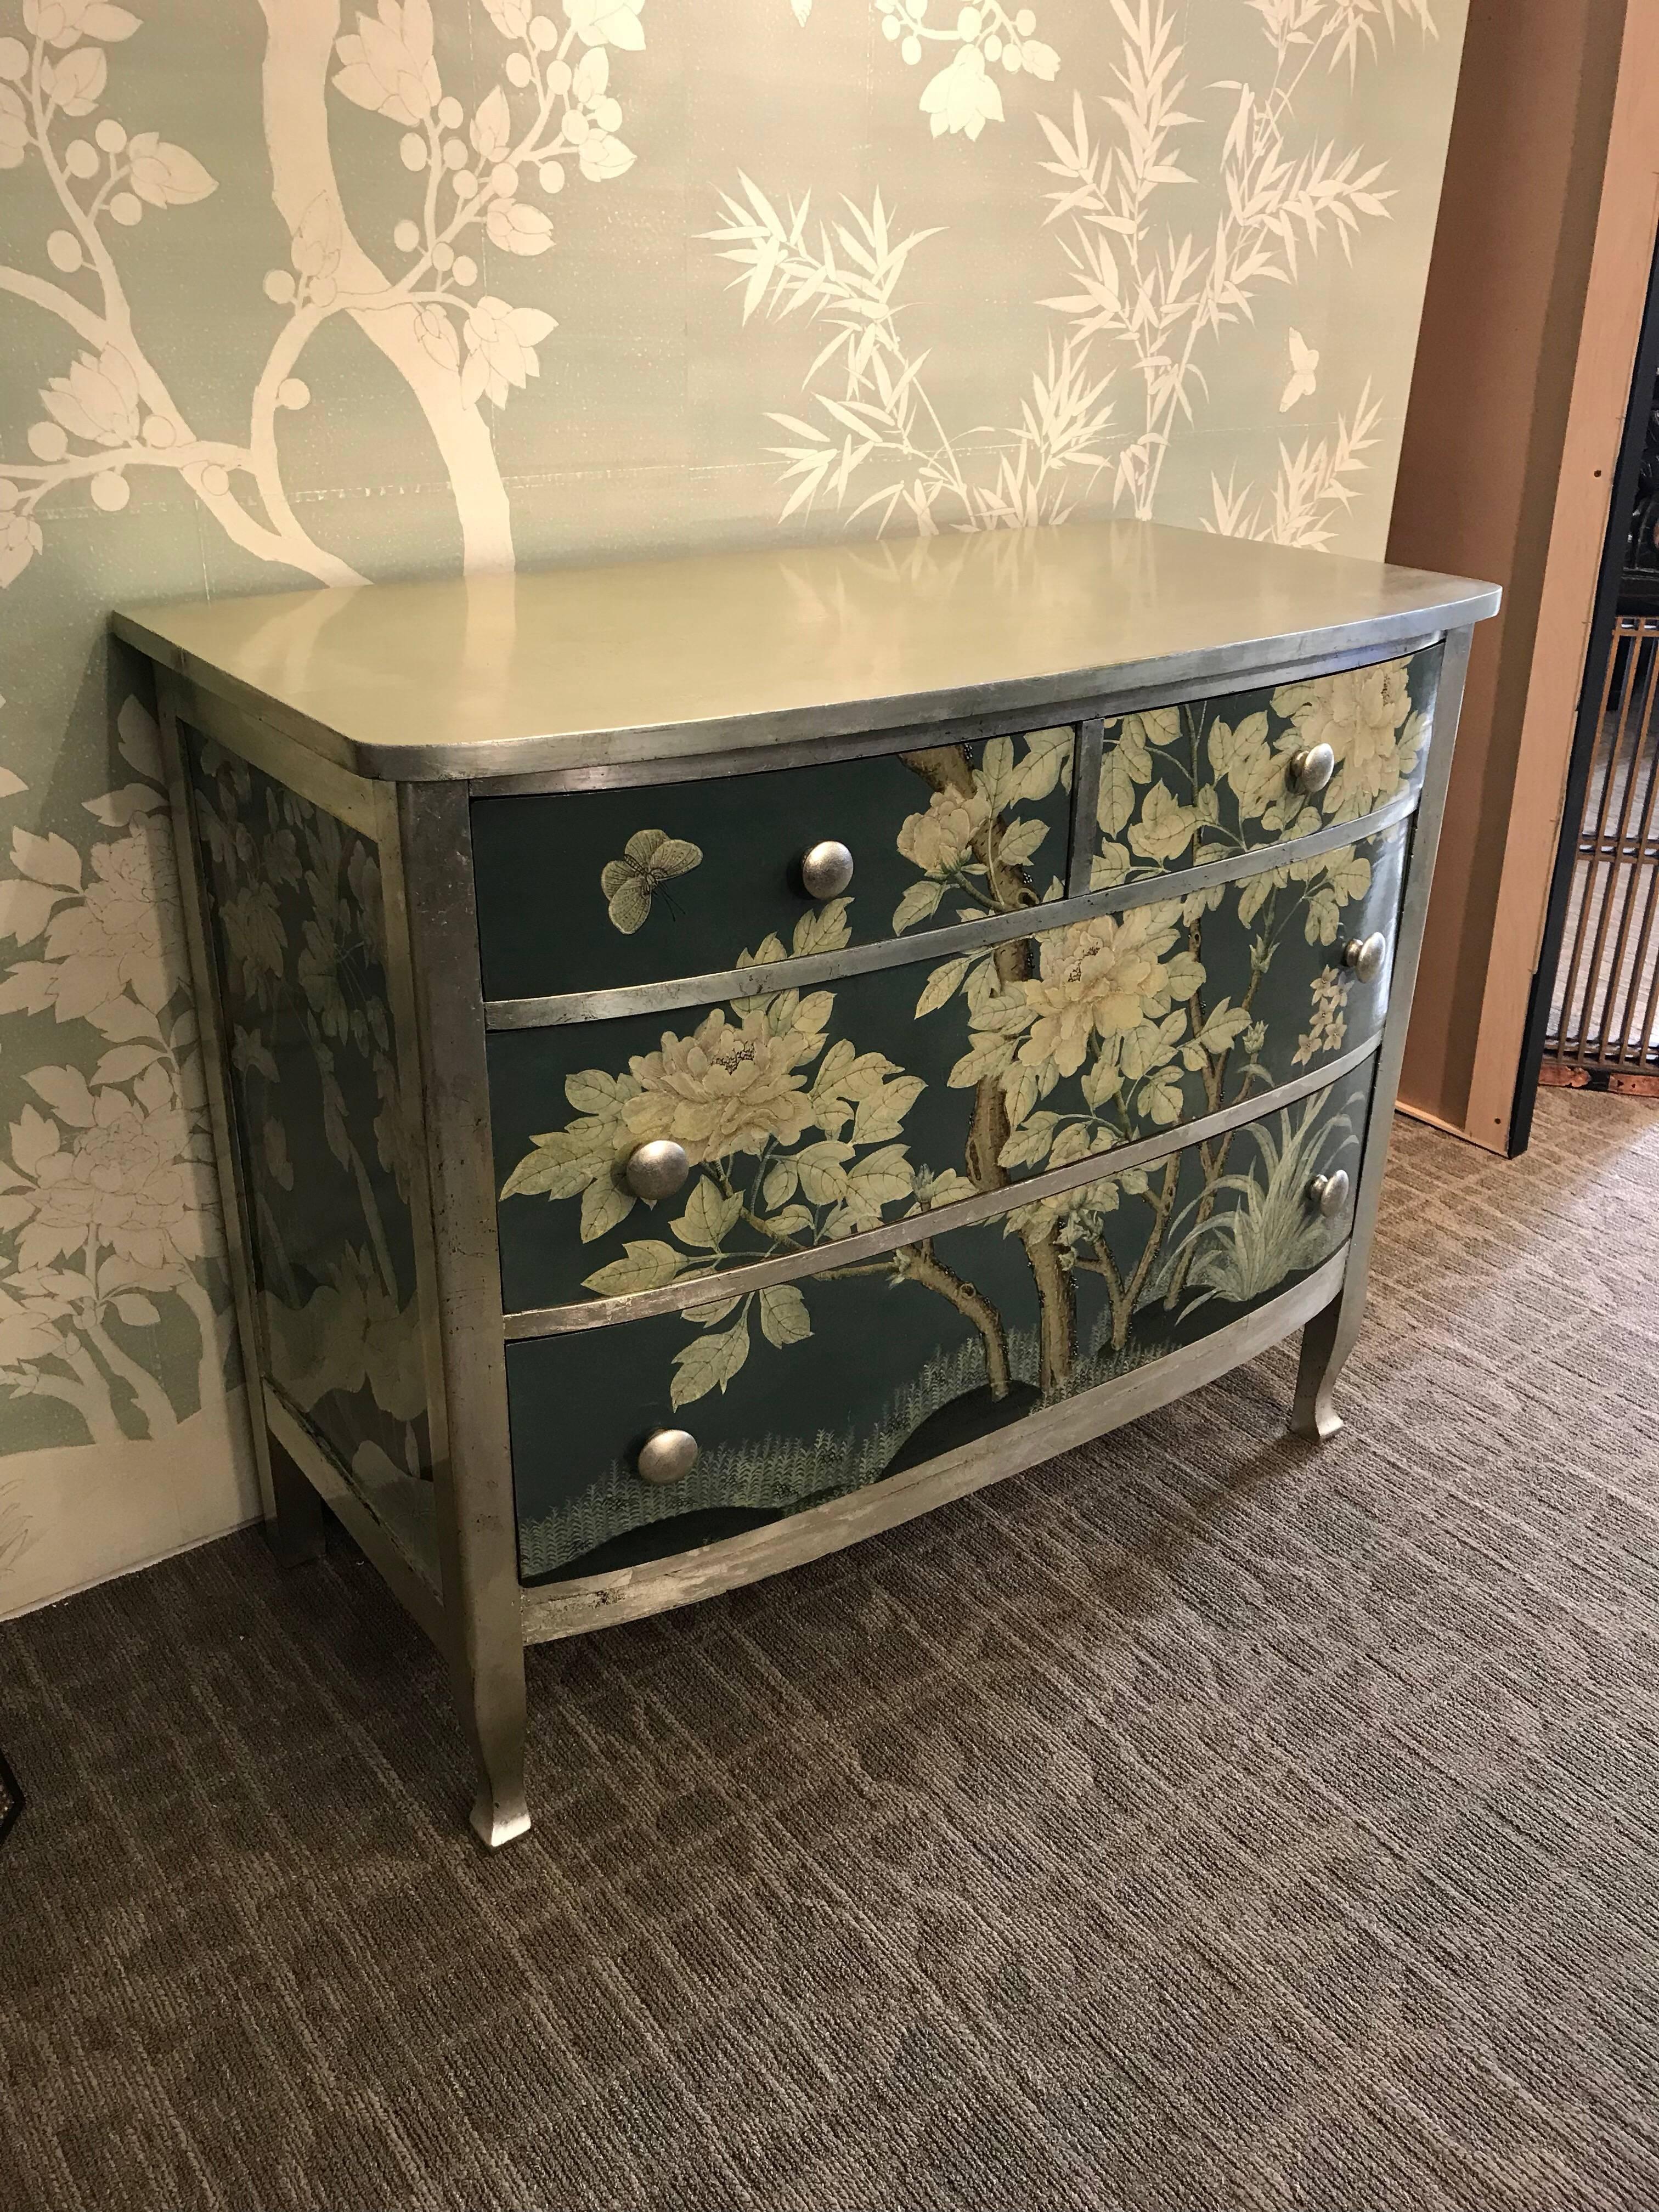 American Dresser with Gracie Wallpaper